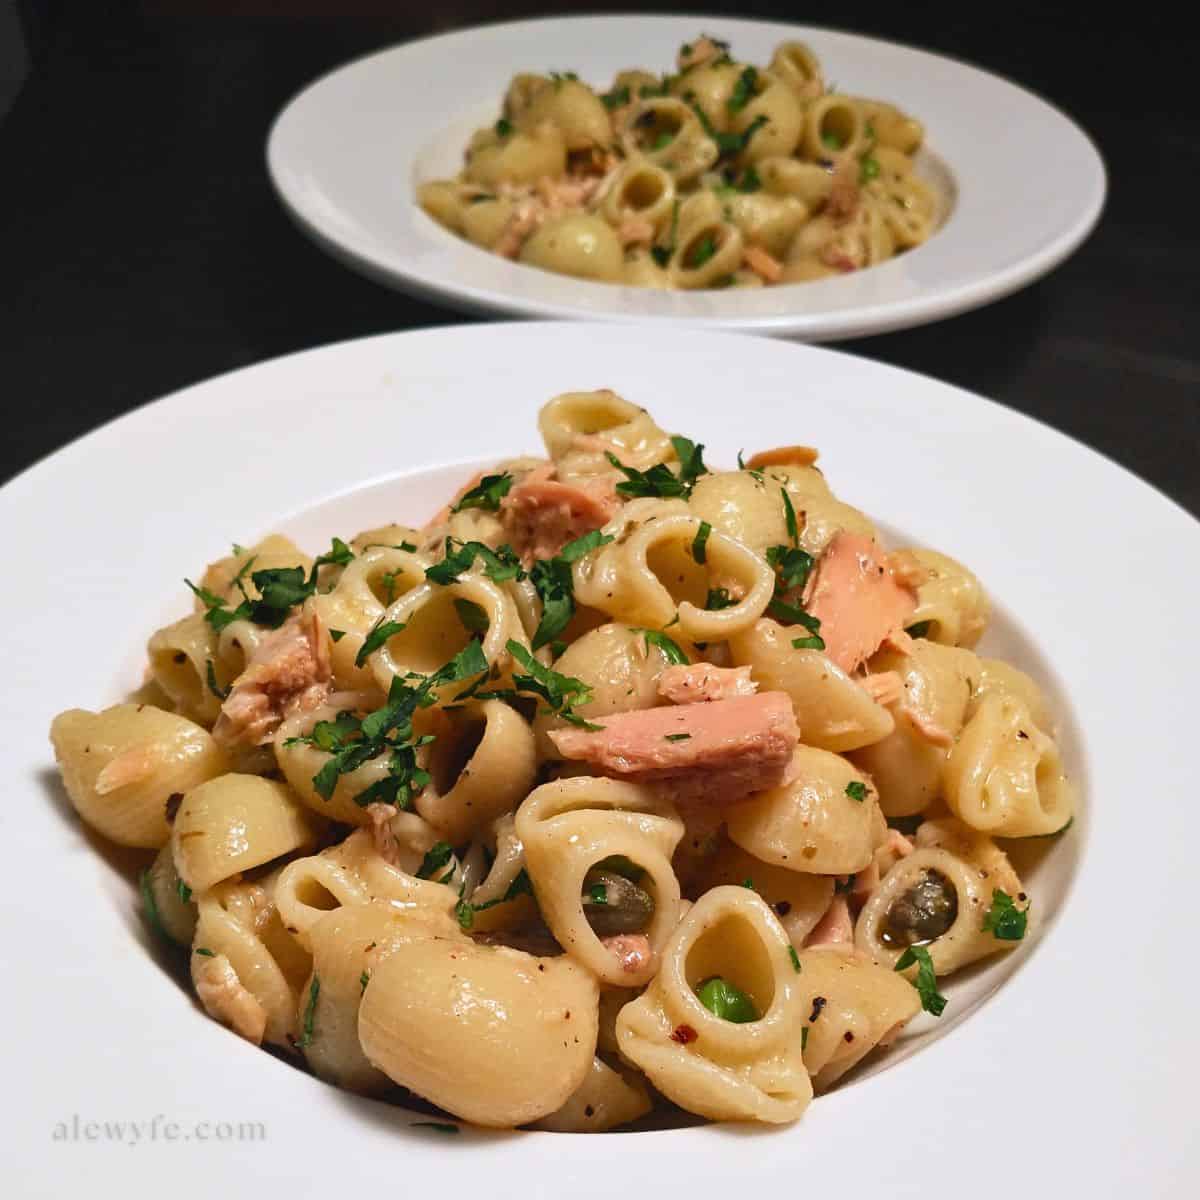 two white wide-rimmed bowls of spicy tuna pasta made with lumache, peas, and capers with bright green parsley.